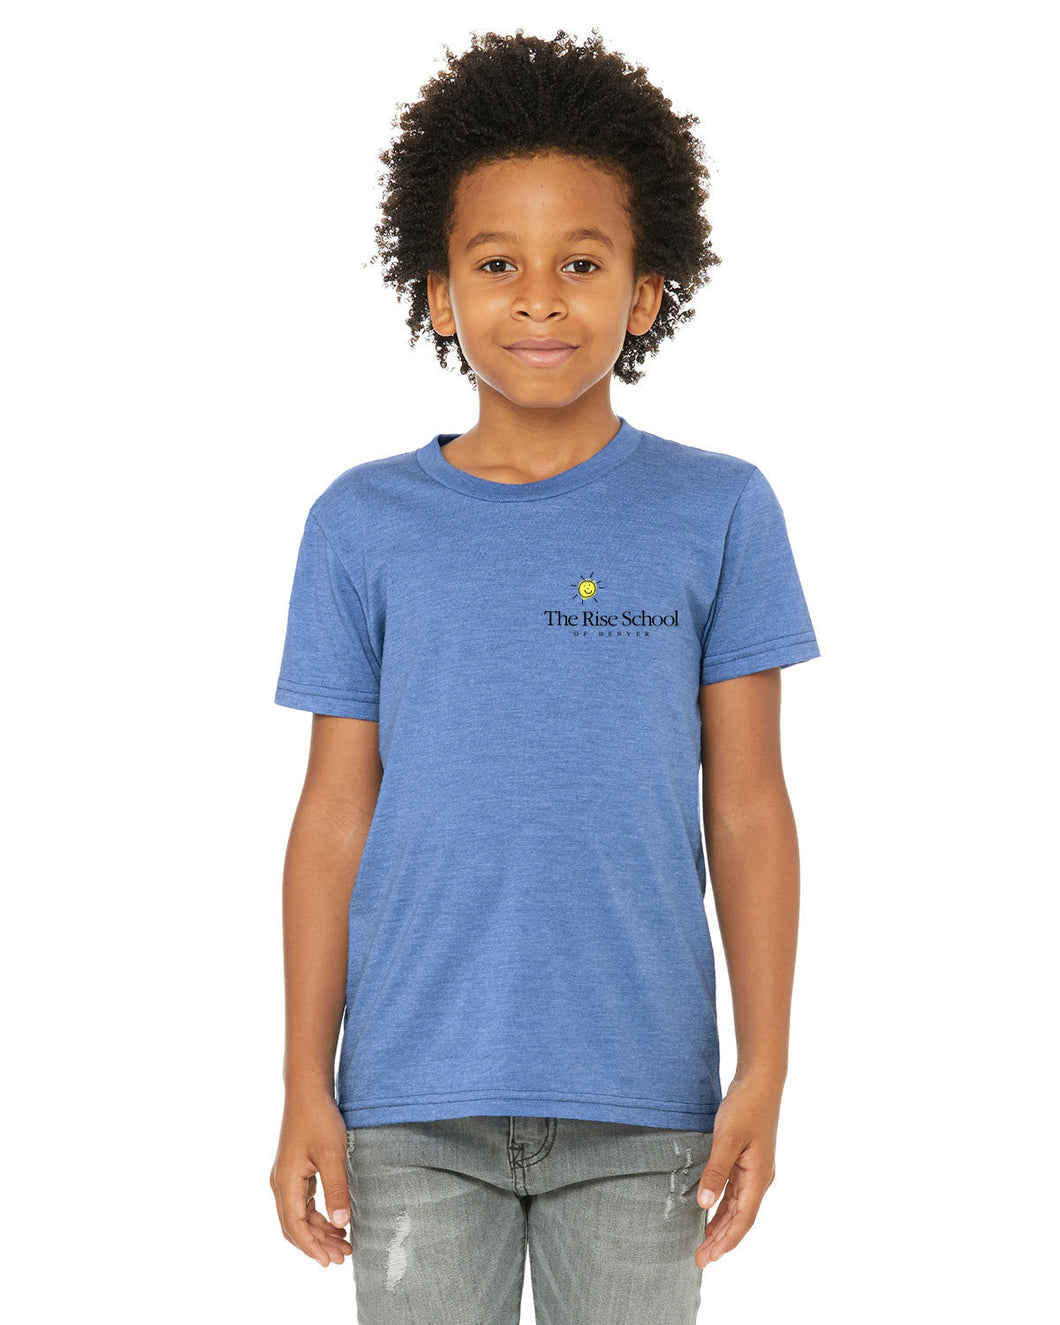 Youth and Toddler Short Sleeved T-Shirt